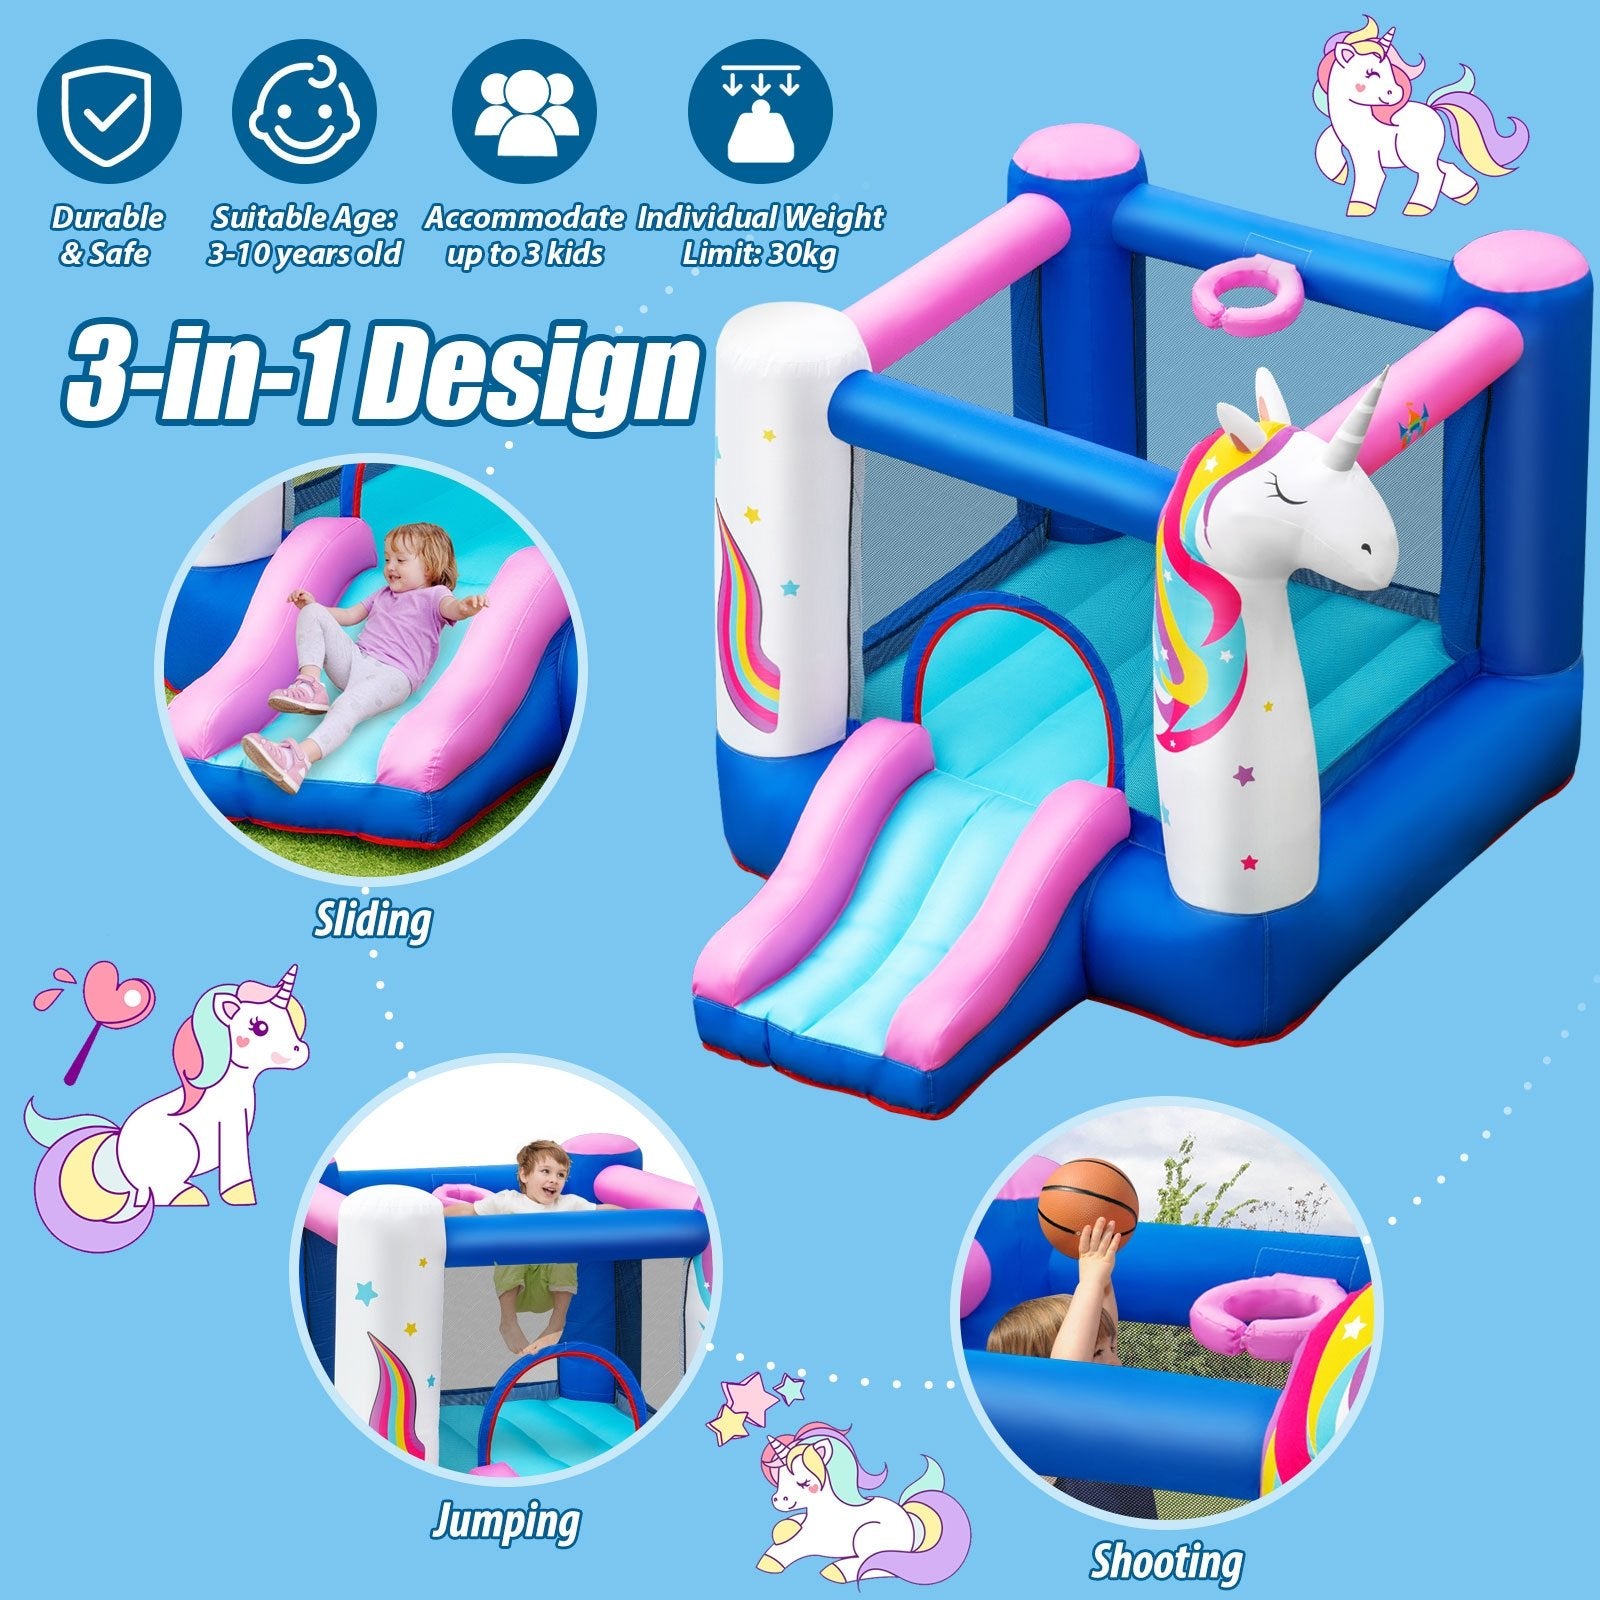 Inflatable Slide Bouncer with Basketball Hoop for Kids Without Blower - Gallery Canada